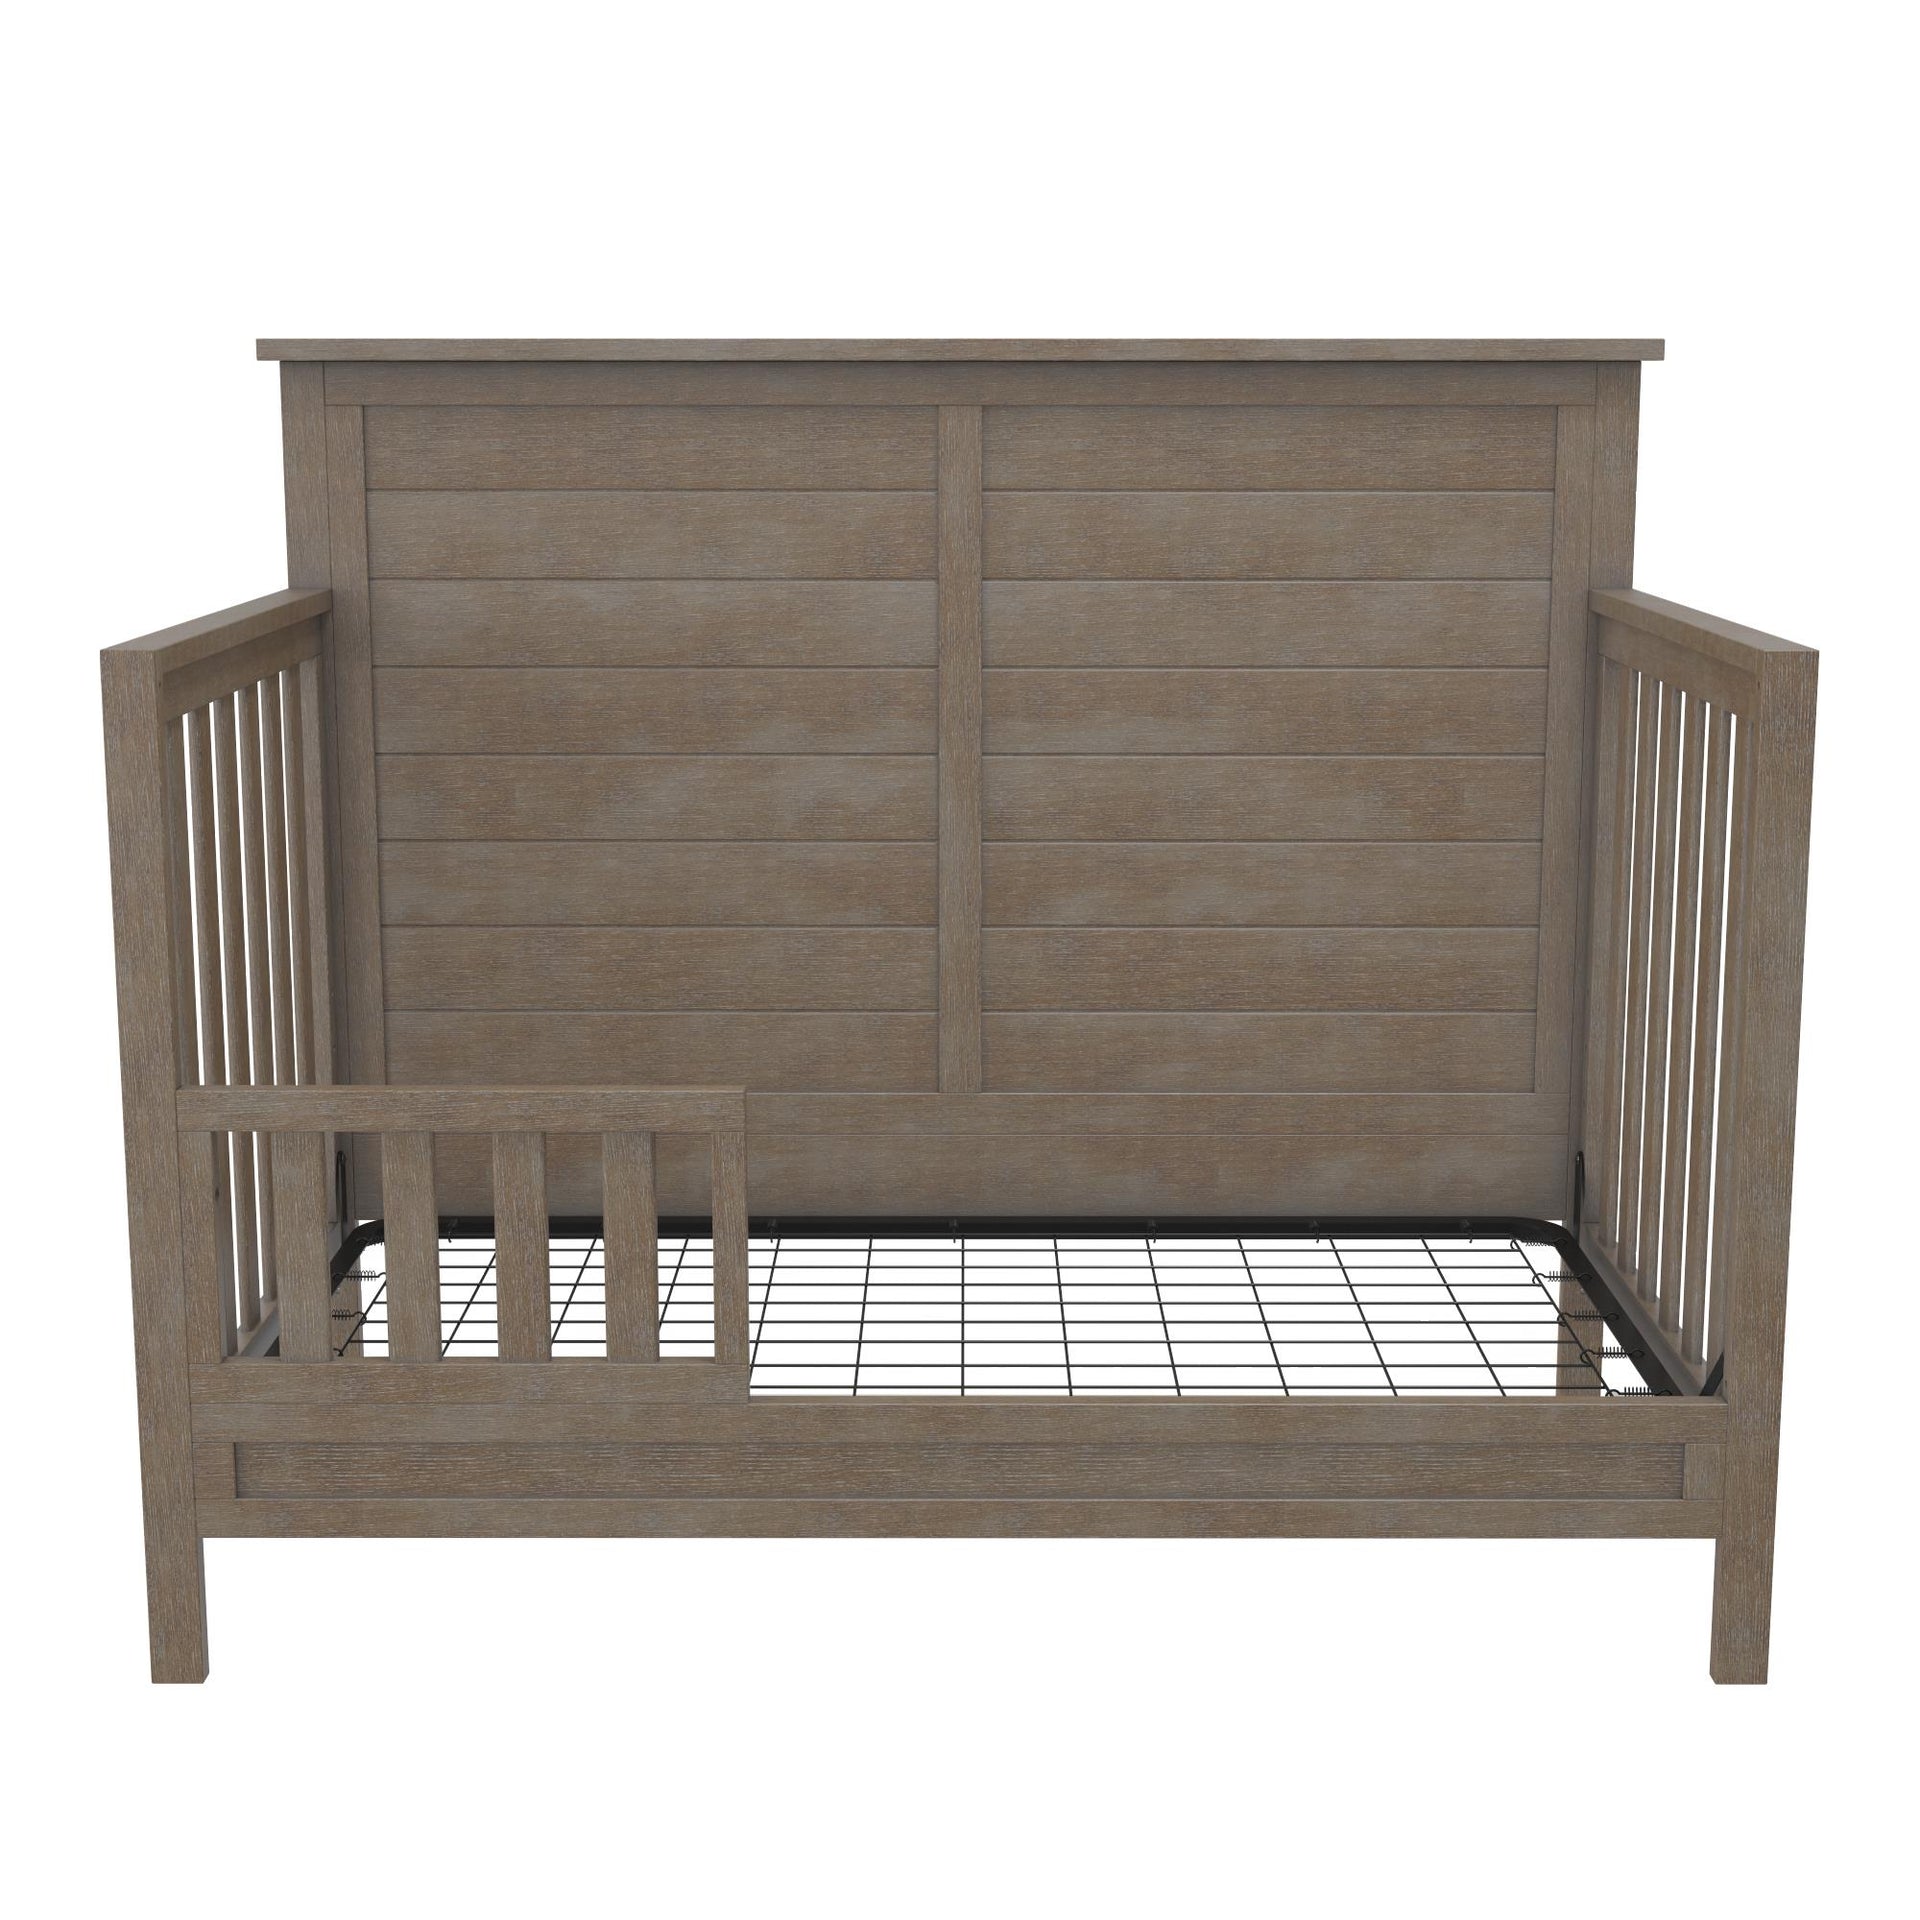 Little Seeds Finch Toddler Rail, Conversion Kit for Crib - Rustic Coffee